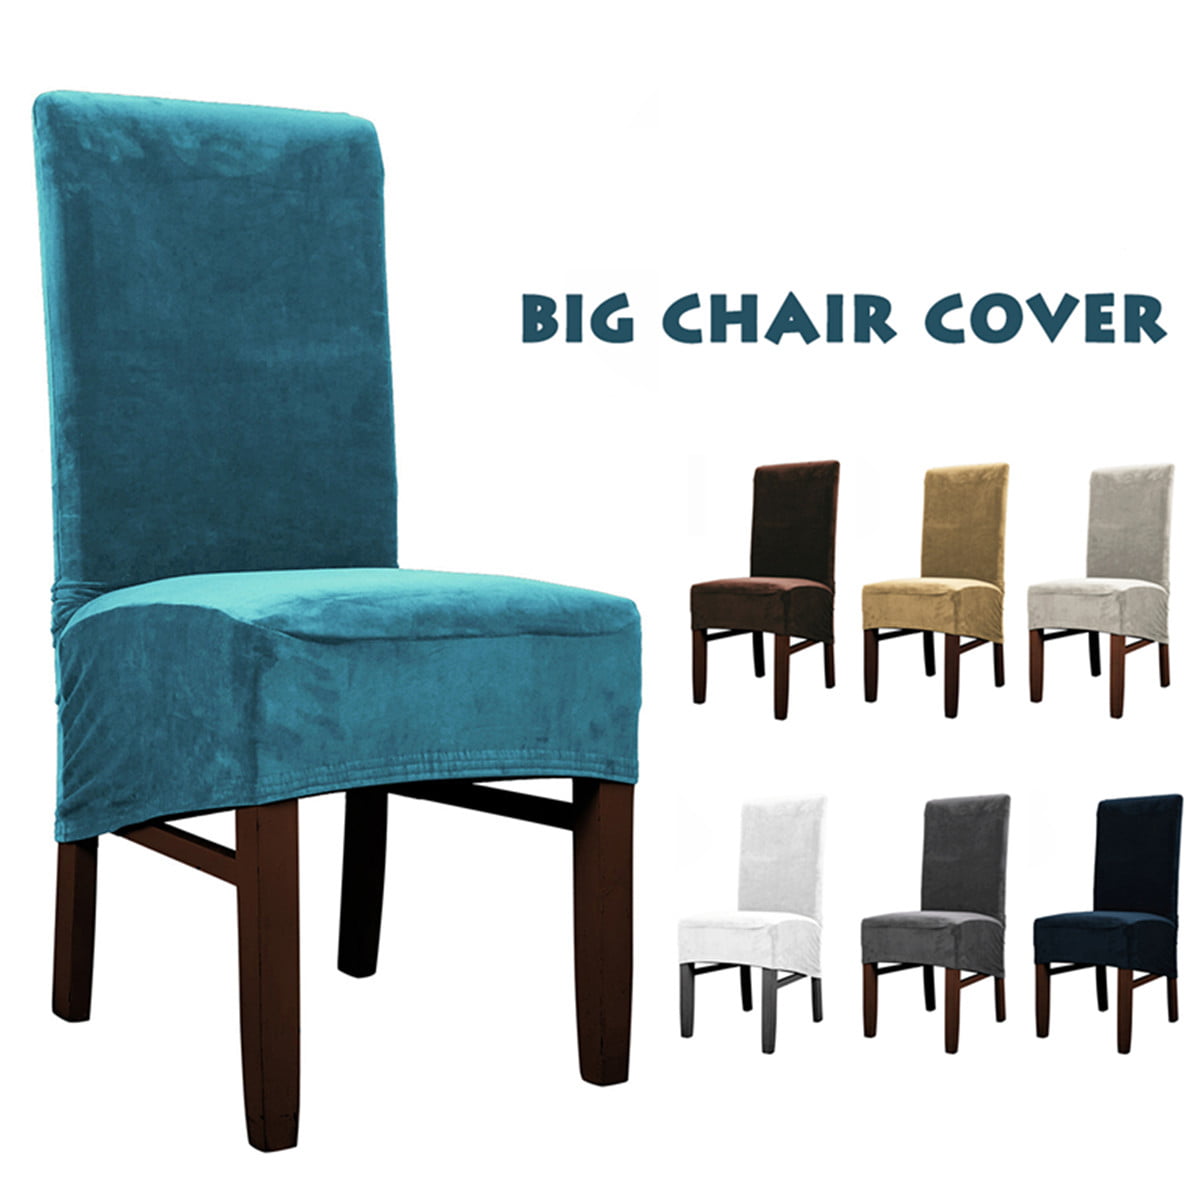 Long Back Chair Covers Velvet Fabric Seat Cover Home Dining Decorations XL Size 